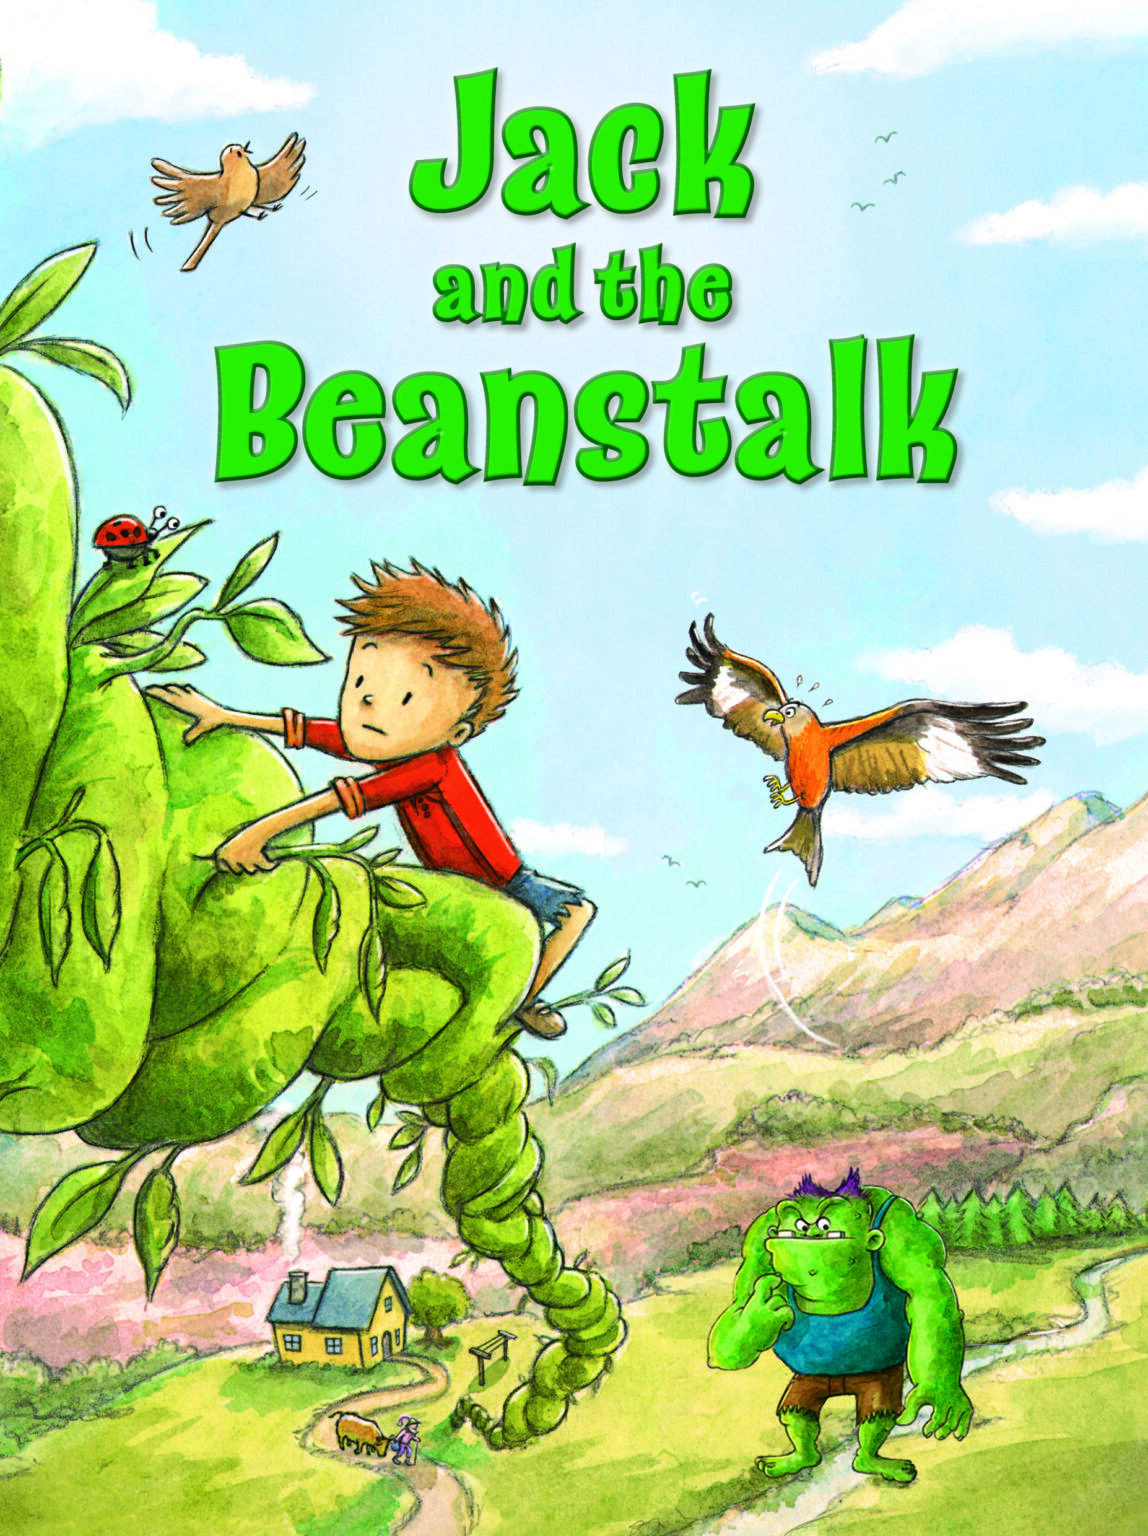 book review on jack and the beanstalk